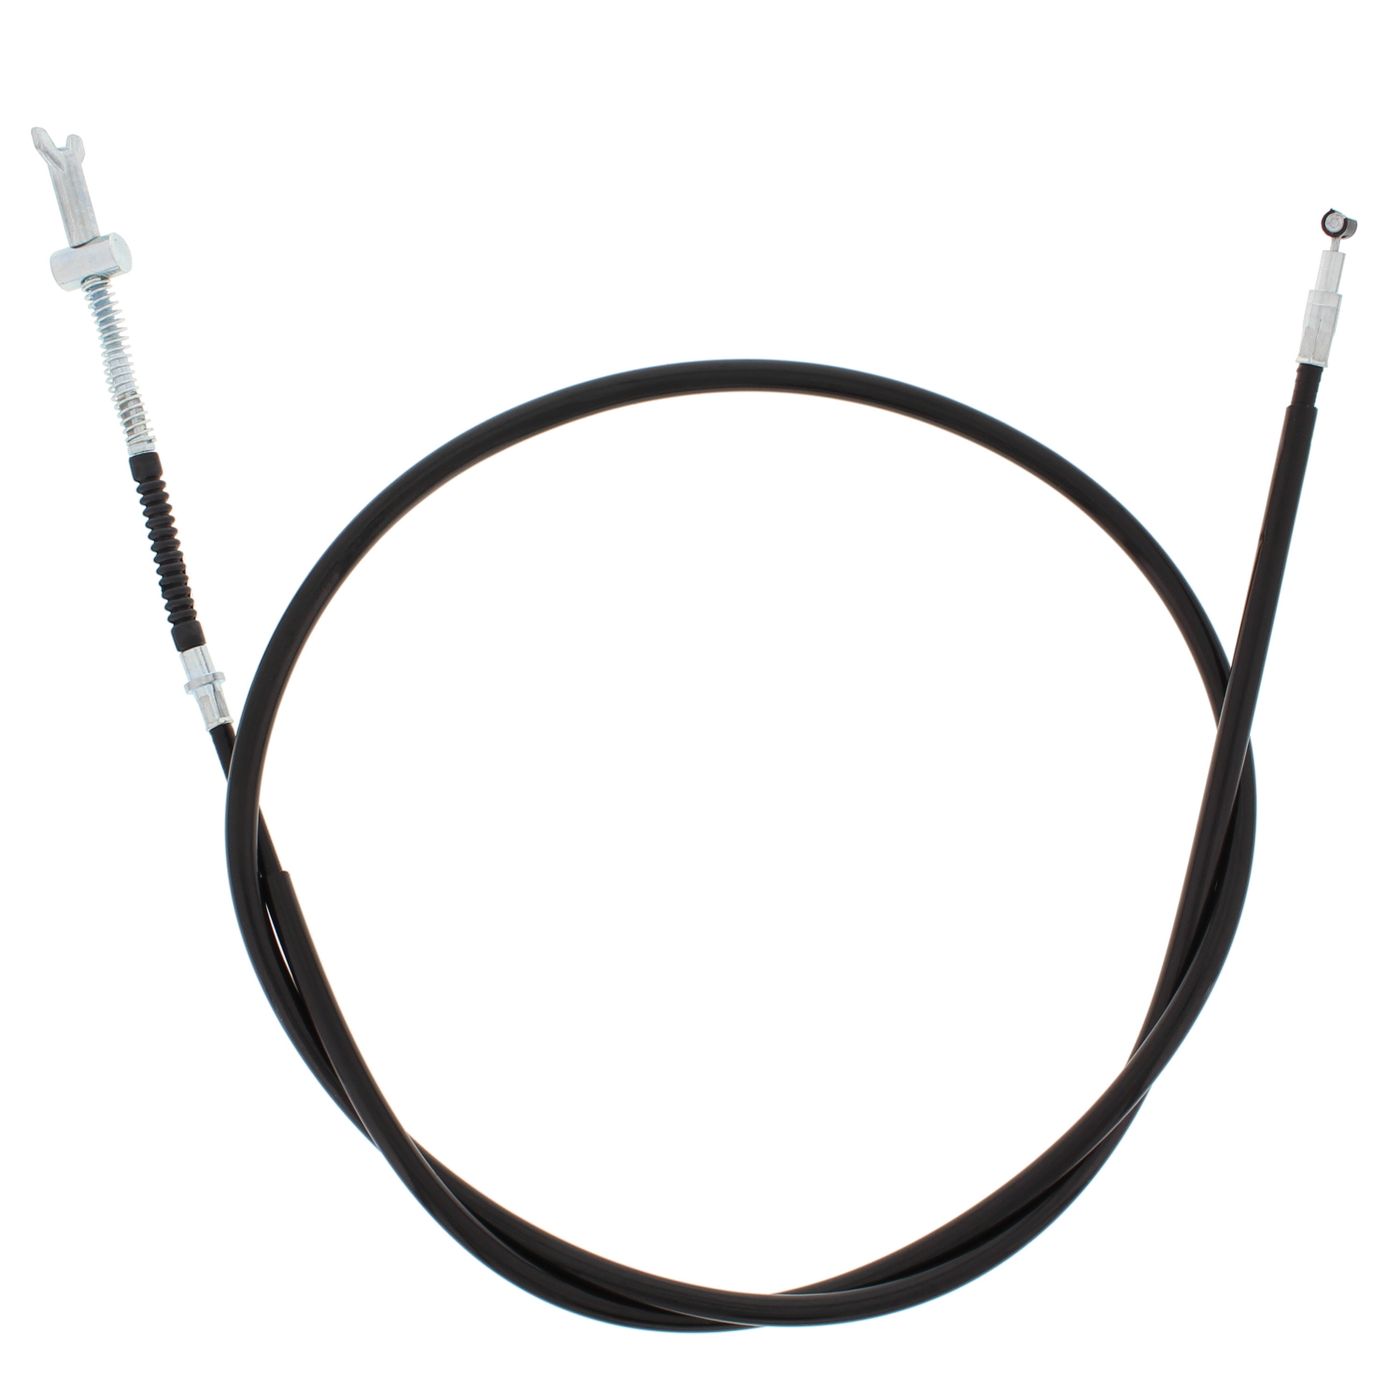 Wrp Brake Cables - WRP454073 image